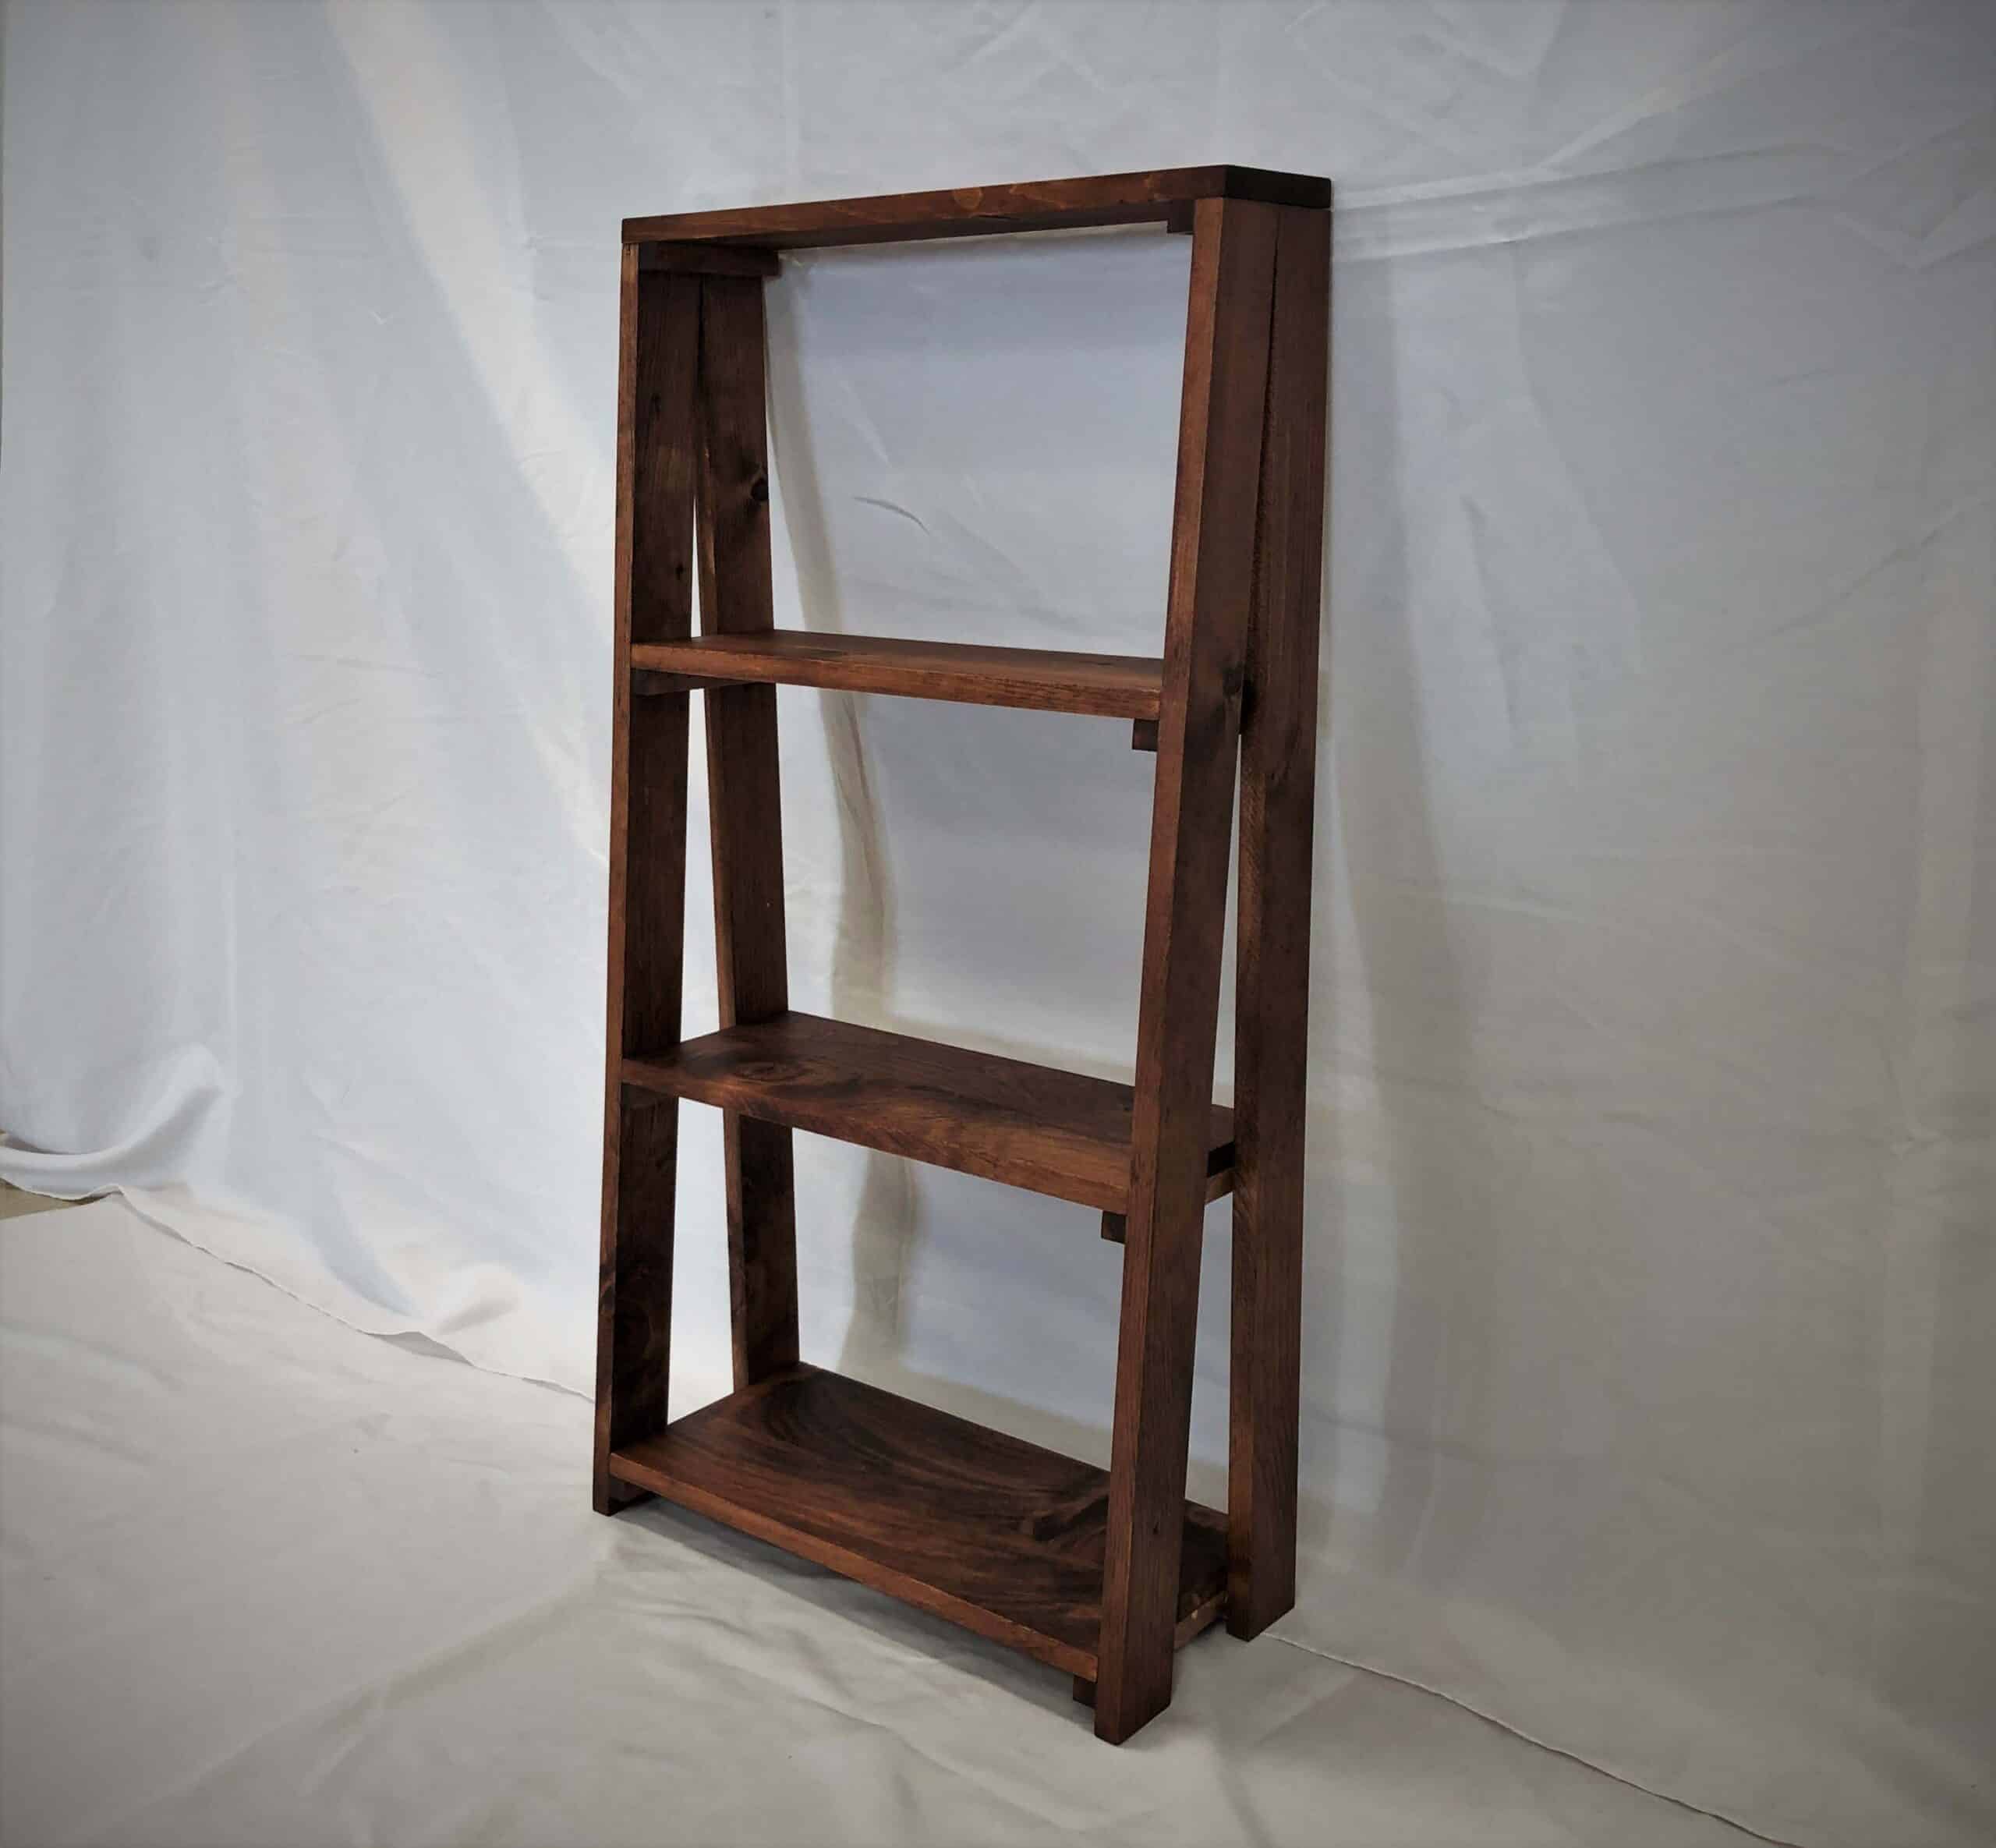 Featured image for “A-Frame Ladder Shelf”